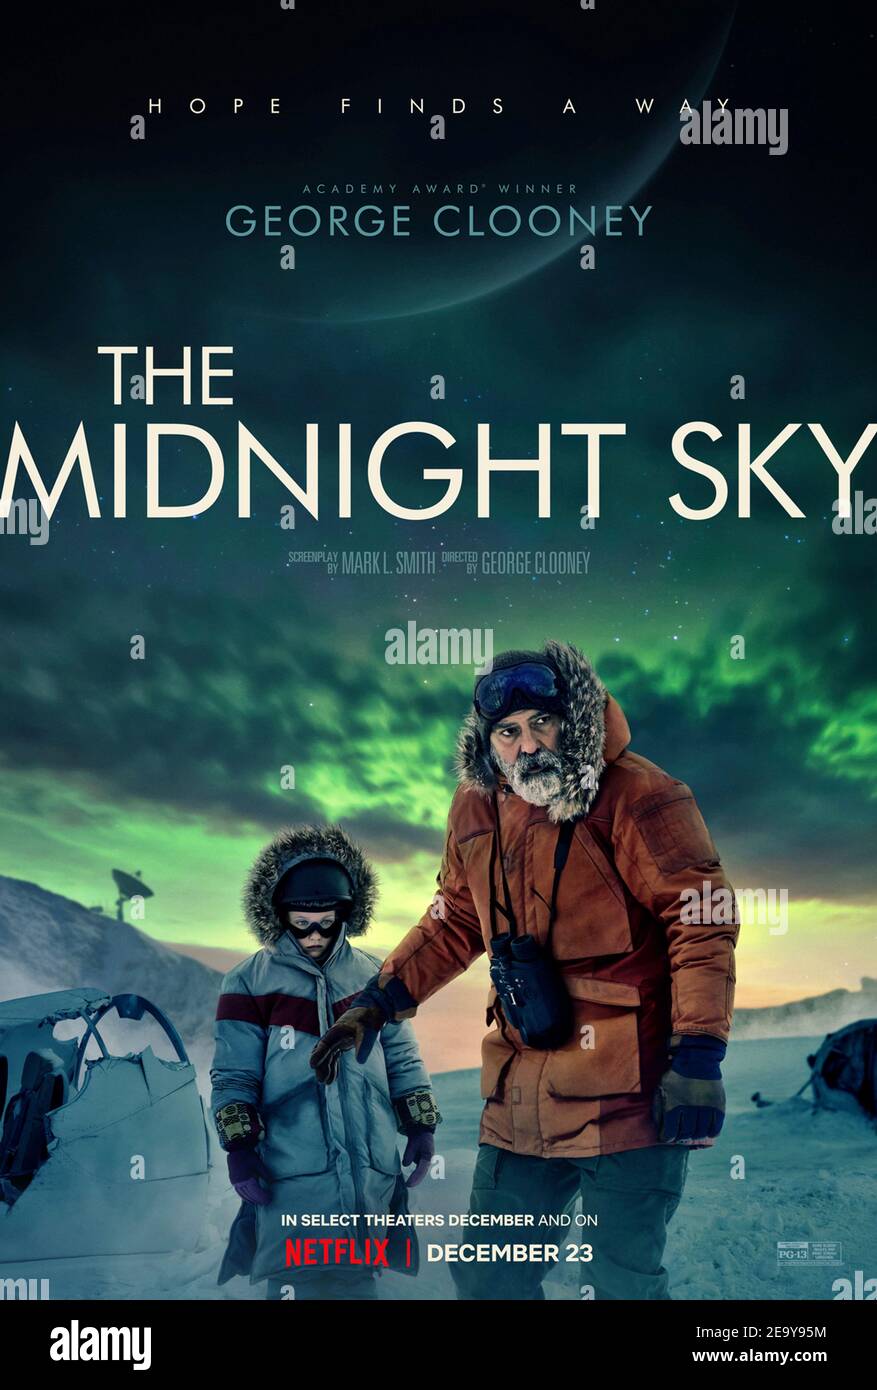 The Midnight Sky (2020) directed by George Clooney and starring George Clooney, Felicity Jones and David Oyelowo. This post-apocalyptic tale follows Augustine, a lonely scientist in the Arctic, as he races to stop Sully and her fellow astronauts from returning home to a mysterious global catastrophe. Stock Photo